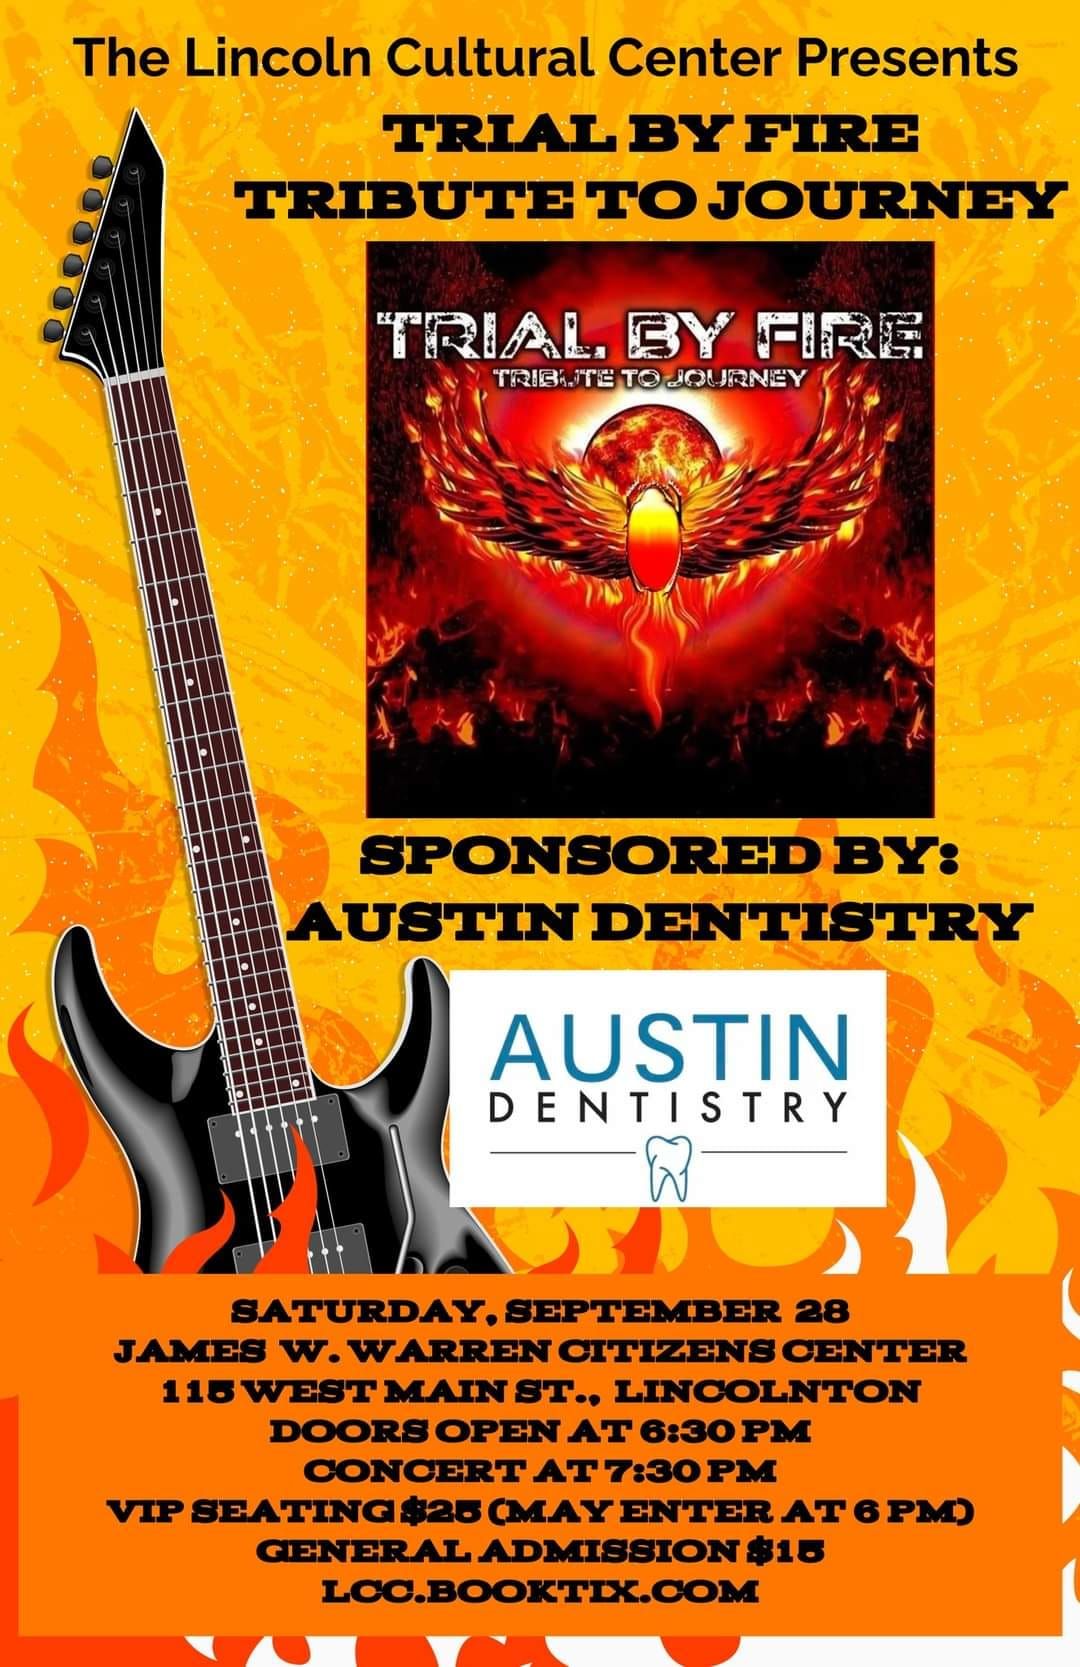 Trial By Fire - A Tribute to Journey 